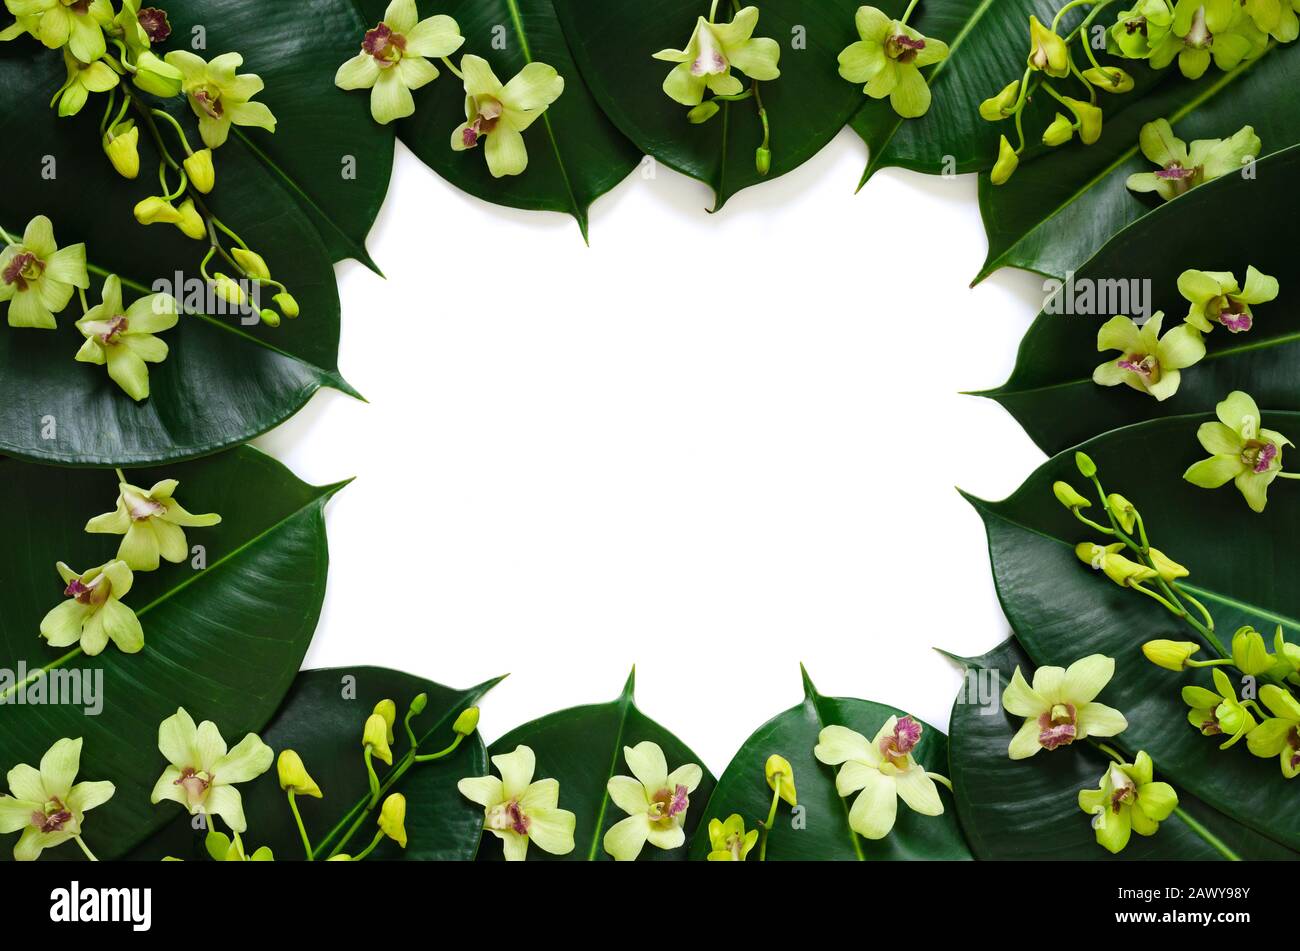 Green orchid flowers put with rubber tree leaves on white background for spring blossom photo concept. Stock Photo